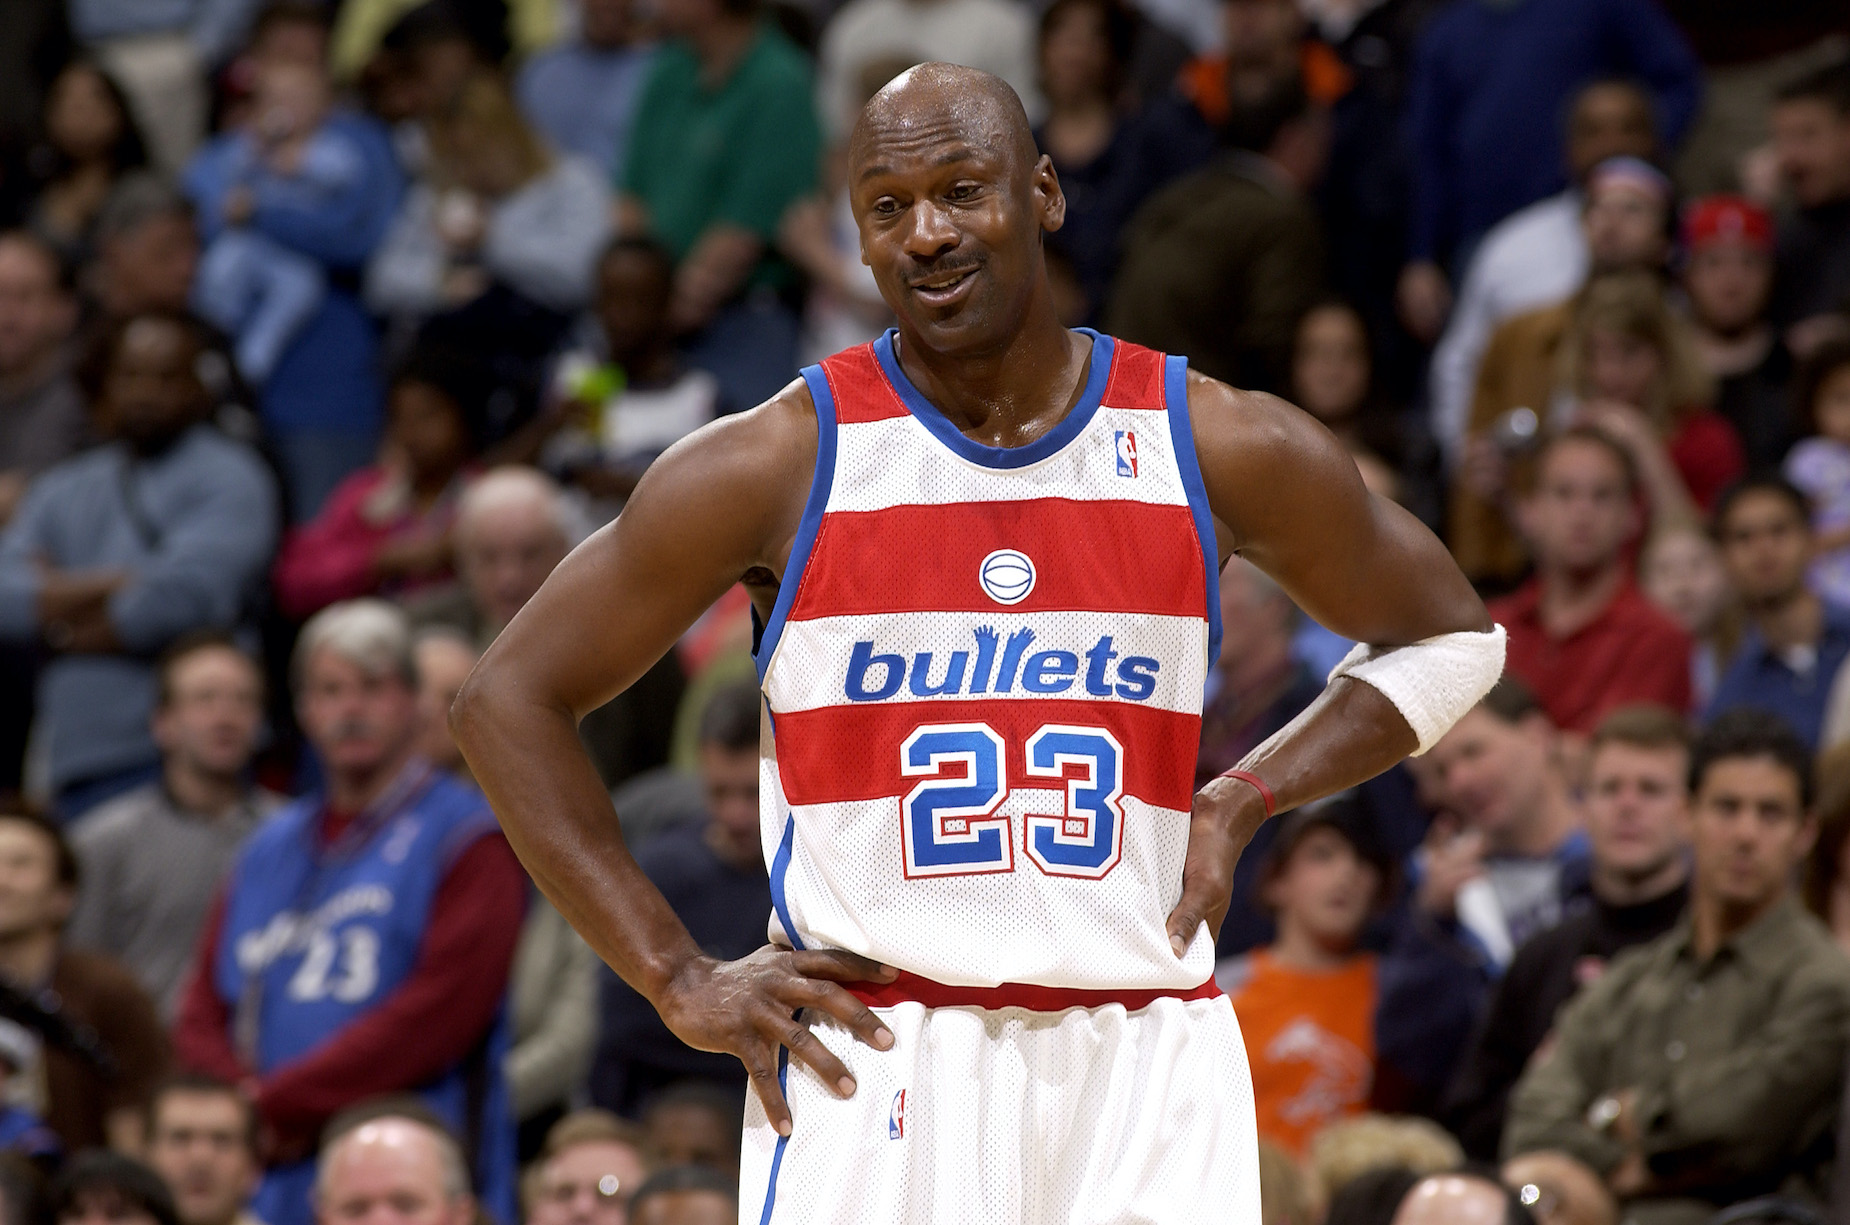 Michael Jordan Is Worth $1.6 He Once Played an NBA Season Without Pocketing a Single Dollar of